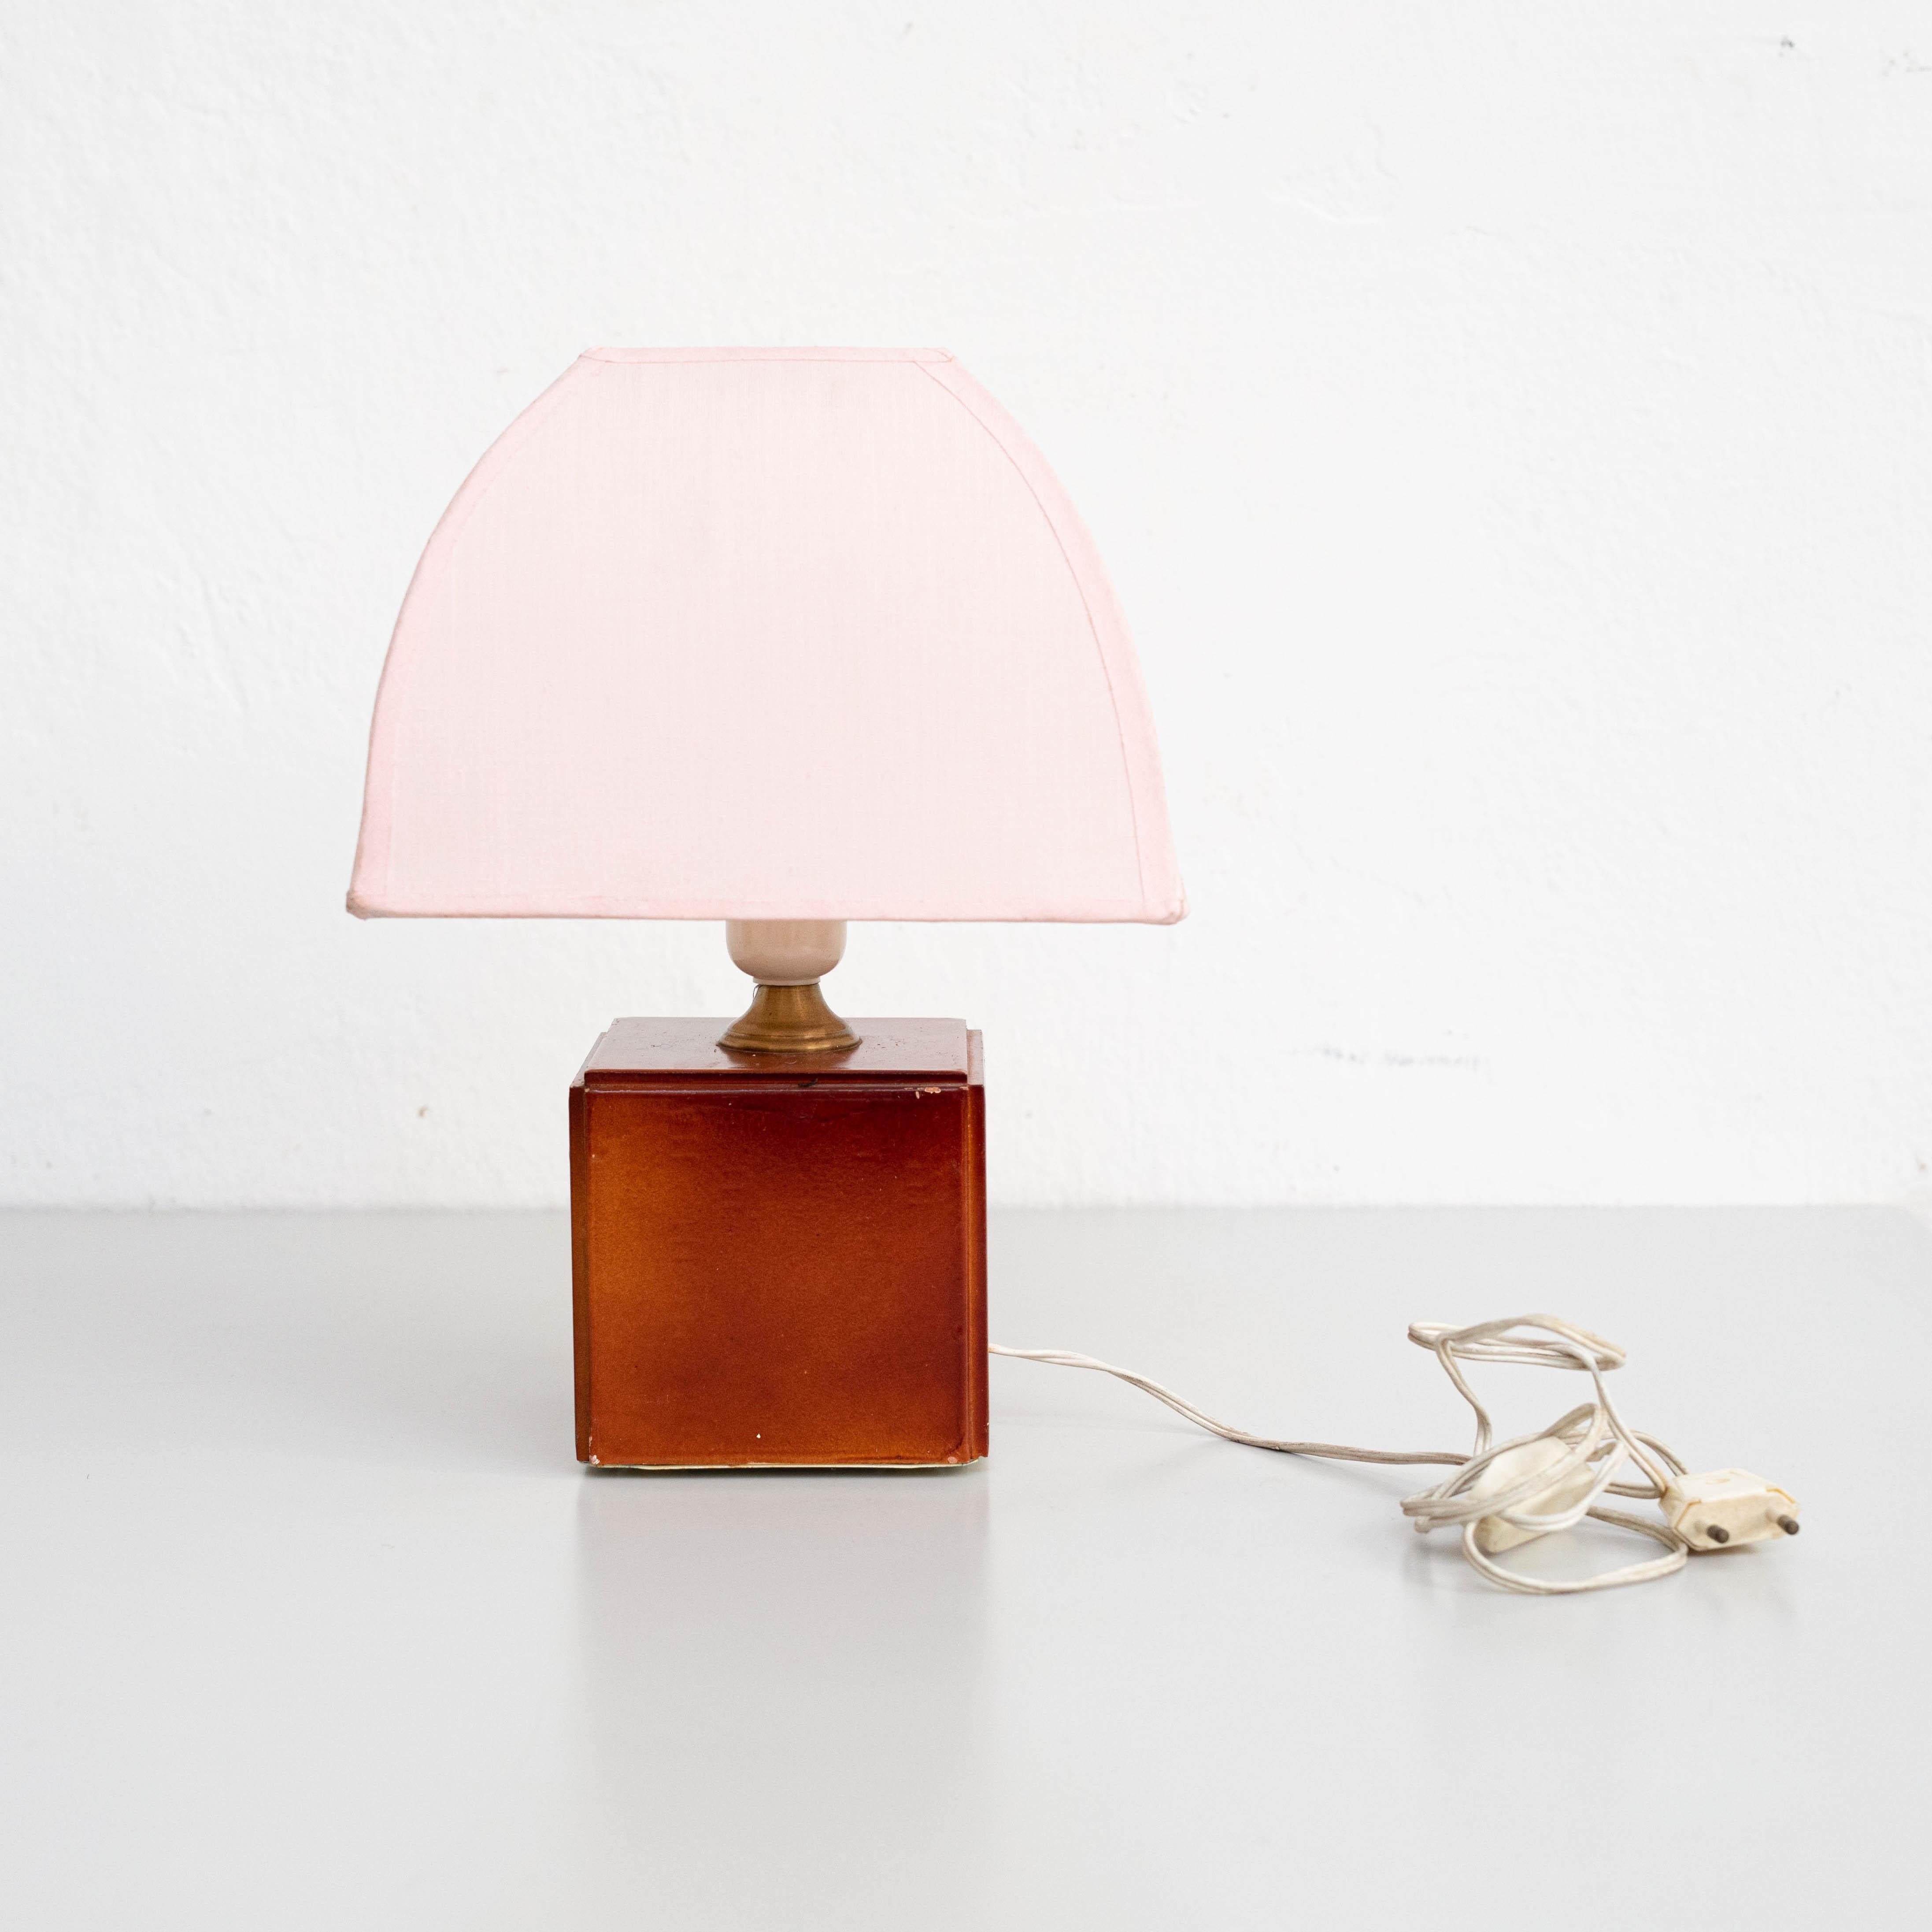 Table lamp, wood, circa 1970.

In original condition, wear consistent with age and use, preserving a beautiful patina.

Materials:
Wood

Dimensions:
H 34 cm
W 23 cm
D 23 cm.